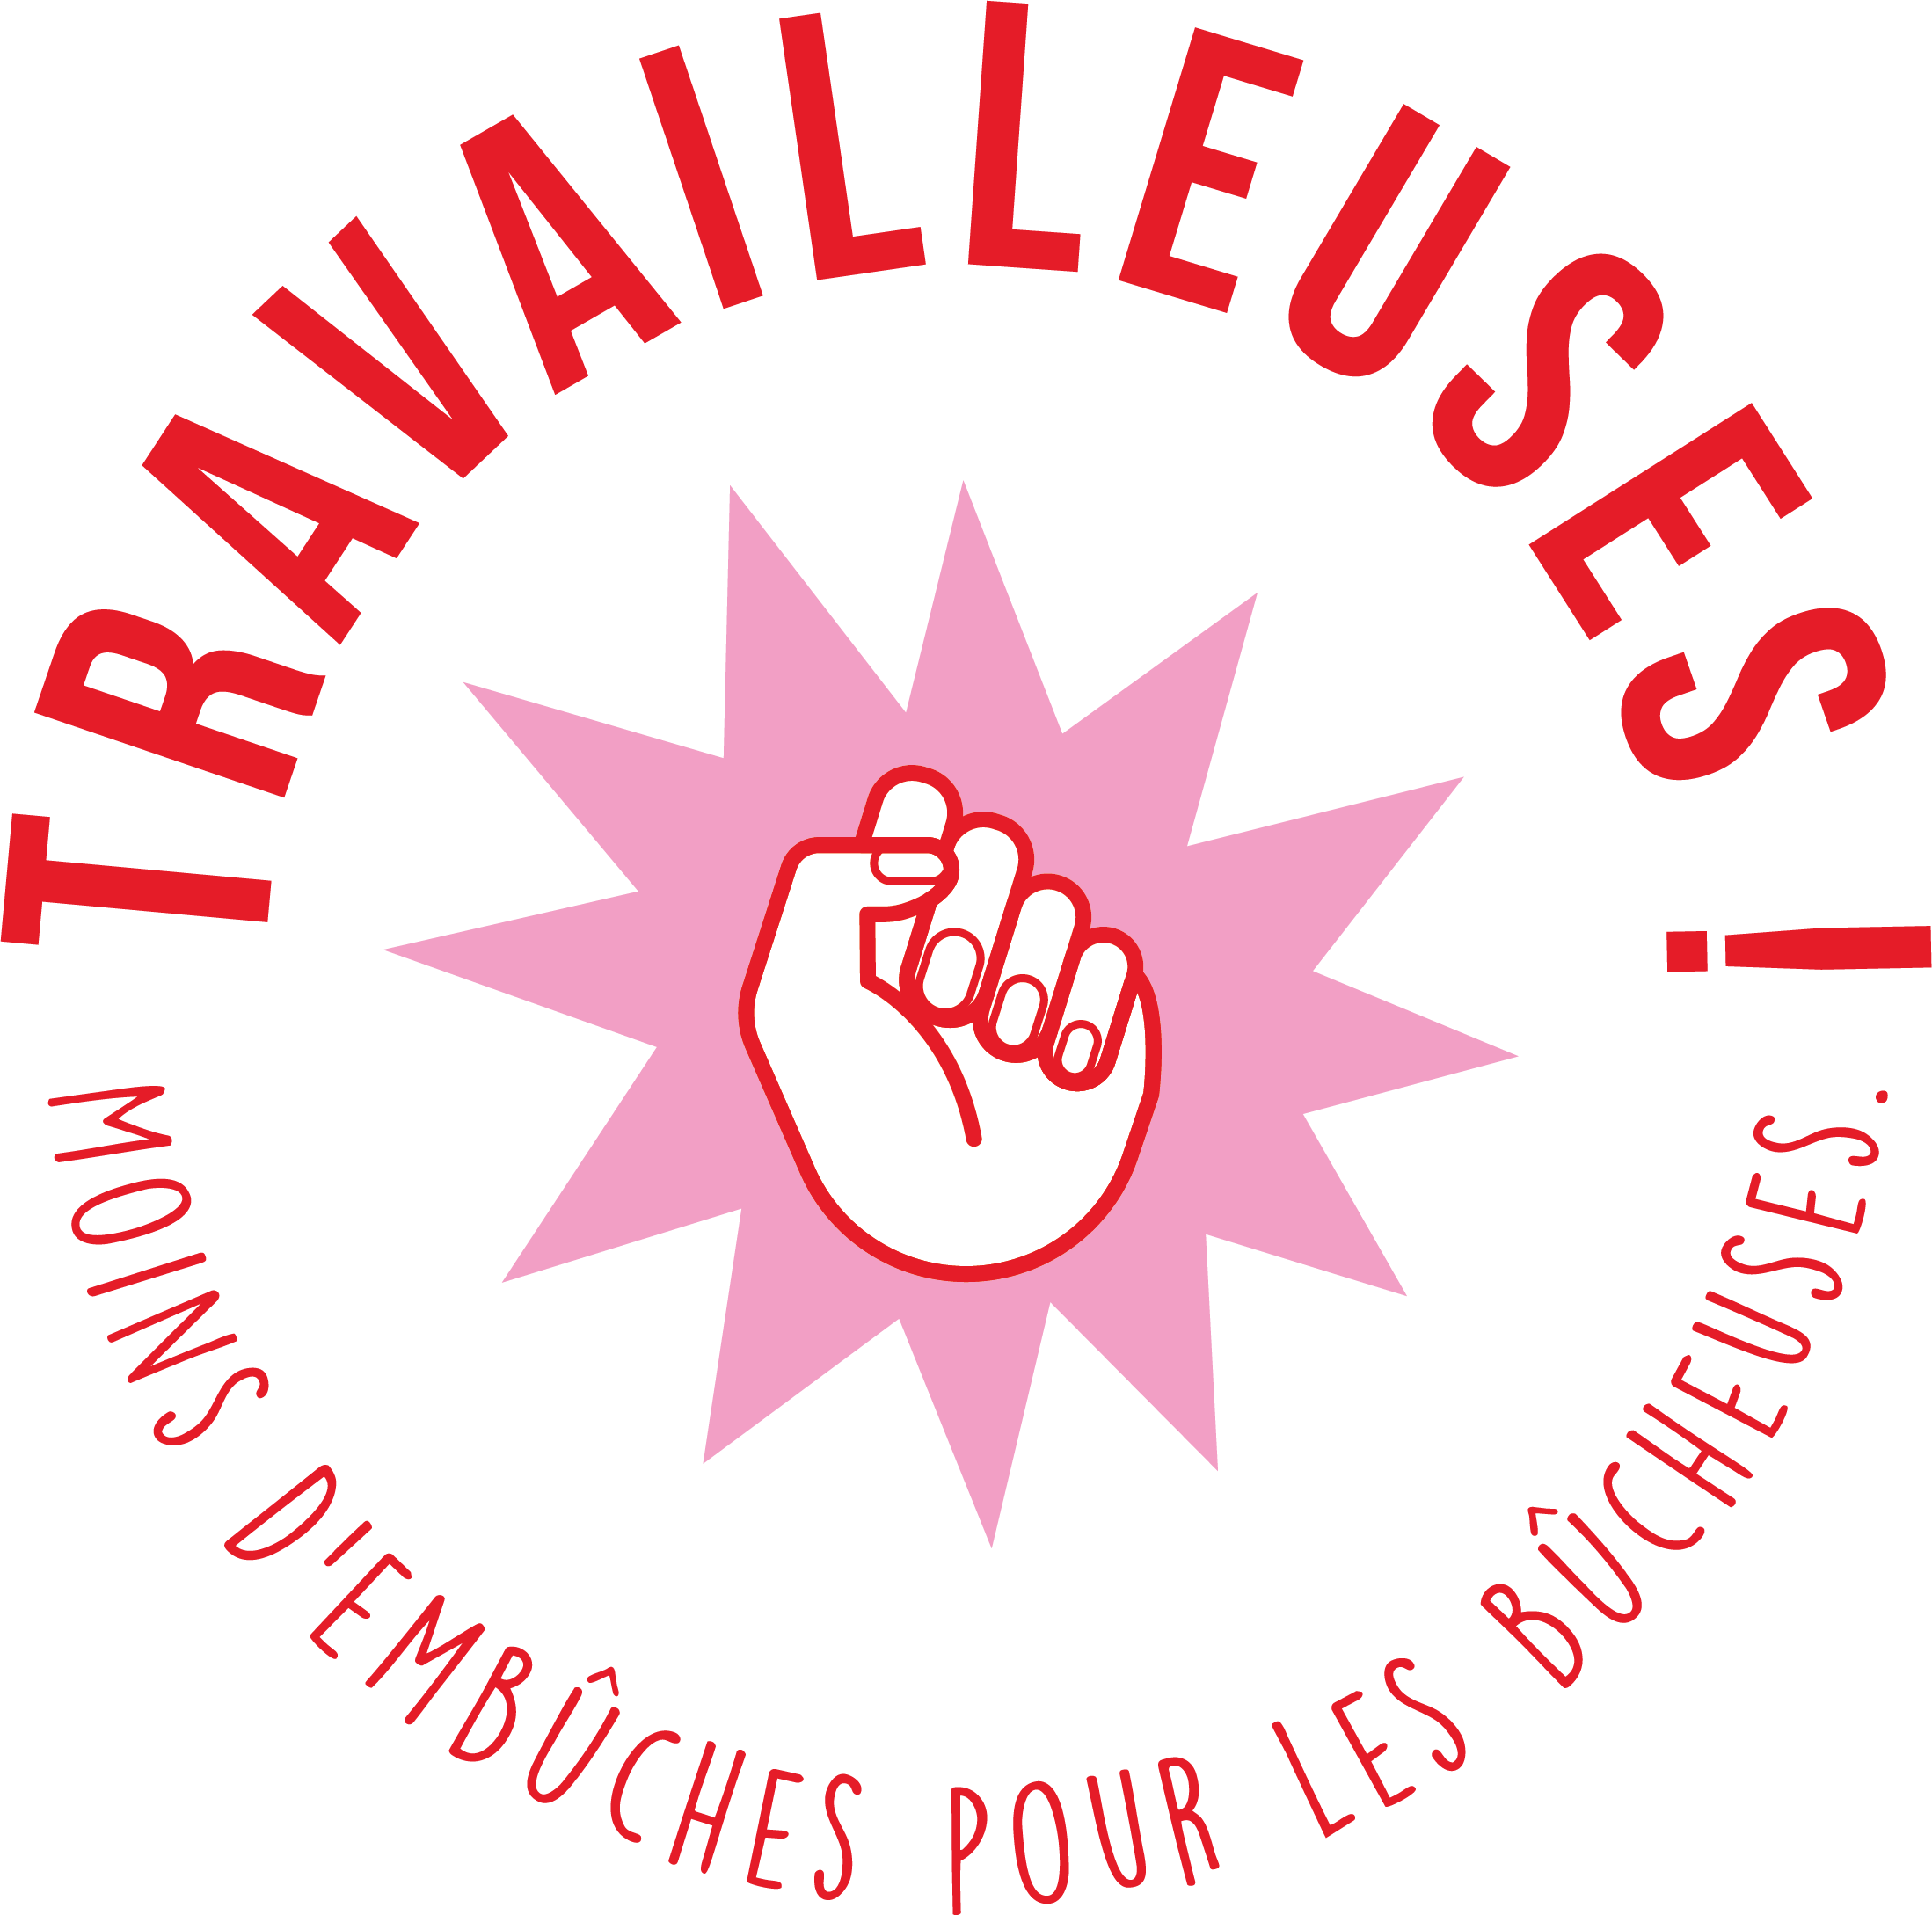 Travailleuses